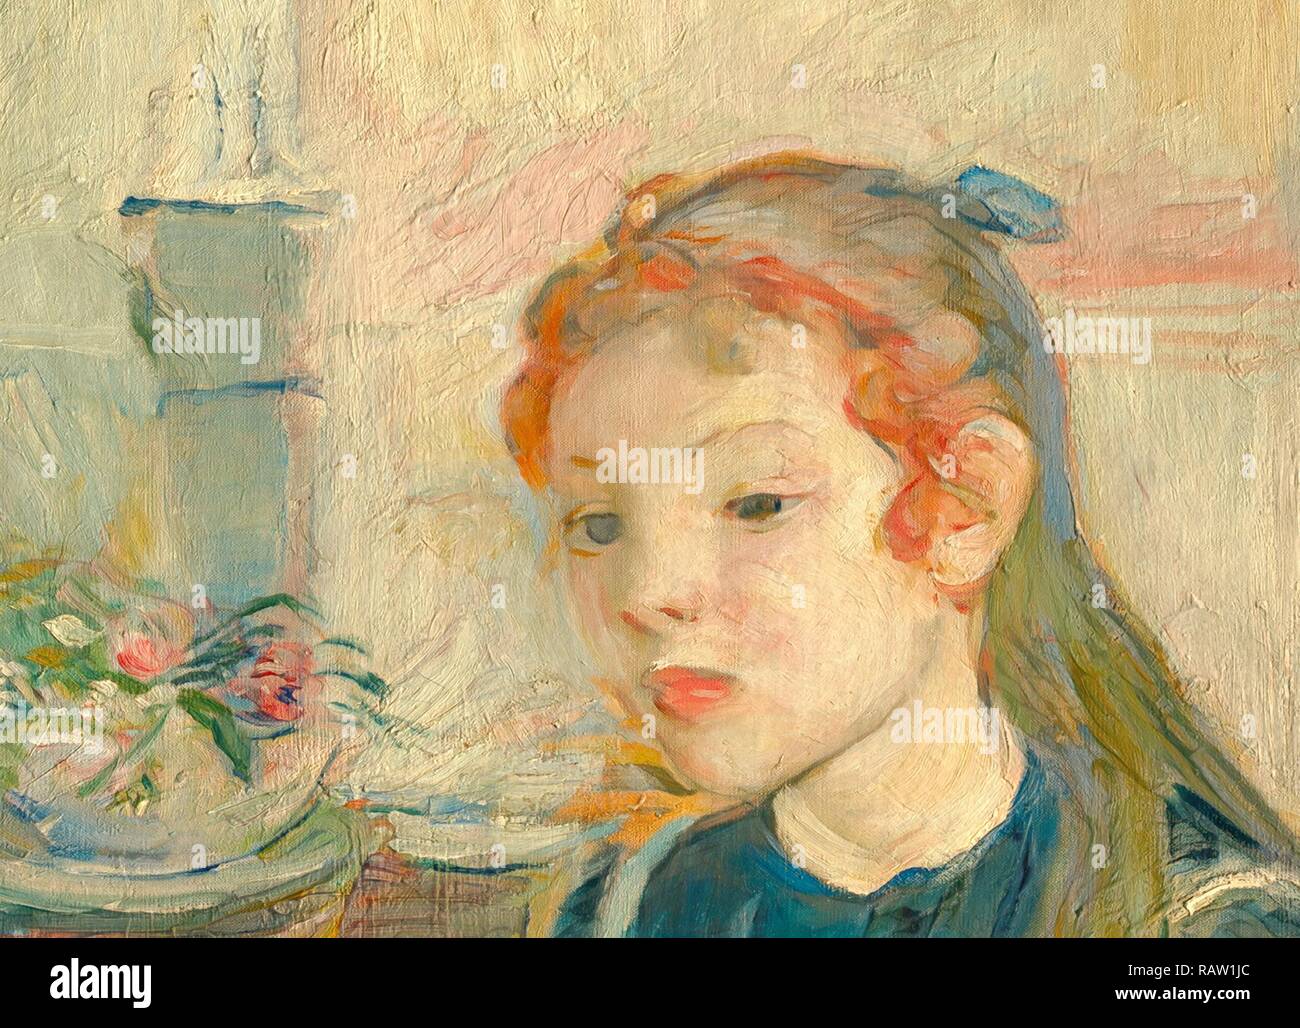 Berthe Morisot, French (1841-1895), Young Girl with an Apron, 1891, oil on canvas. Reimagined by Gibon. Classic art reimagined Stock Photo